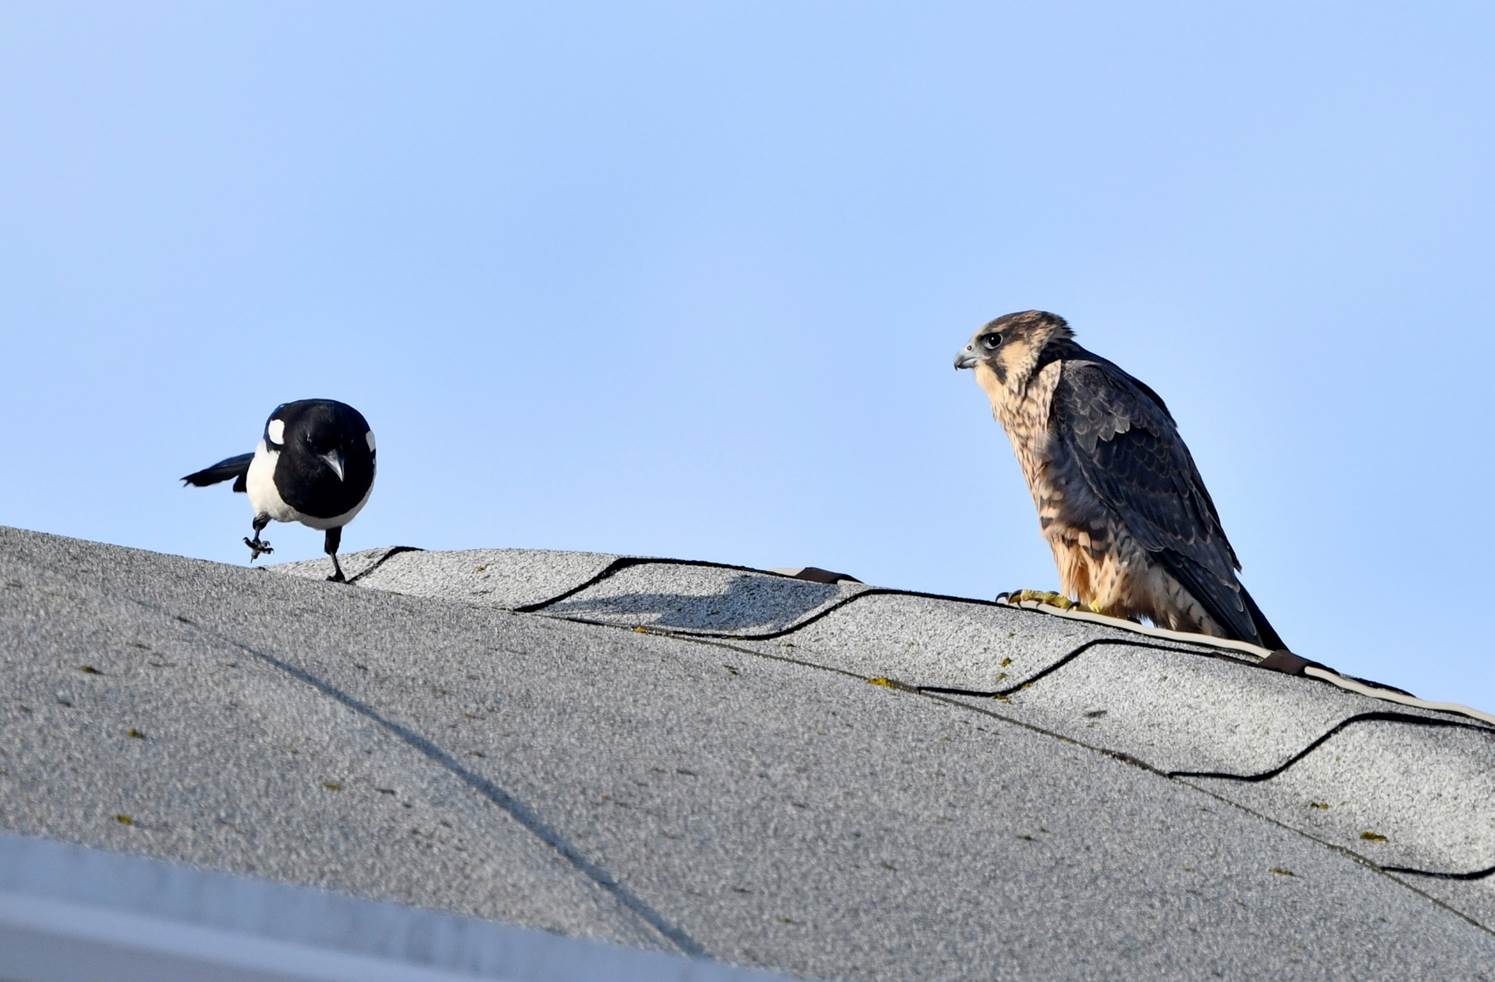 Two birds on a roof

Description automatically generated with medium confidence